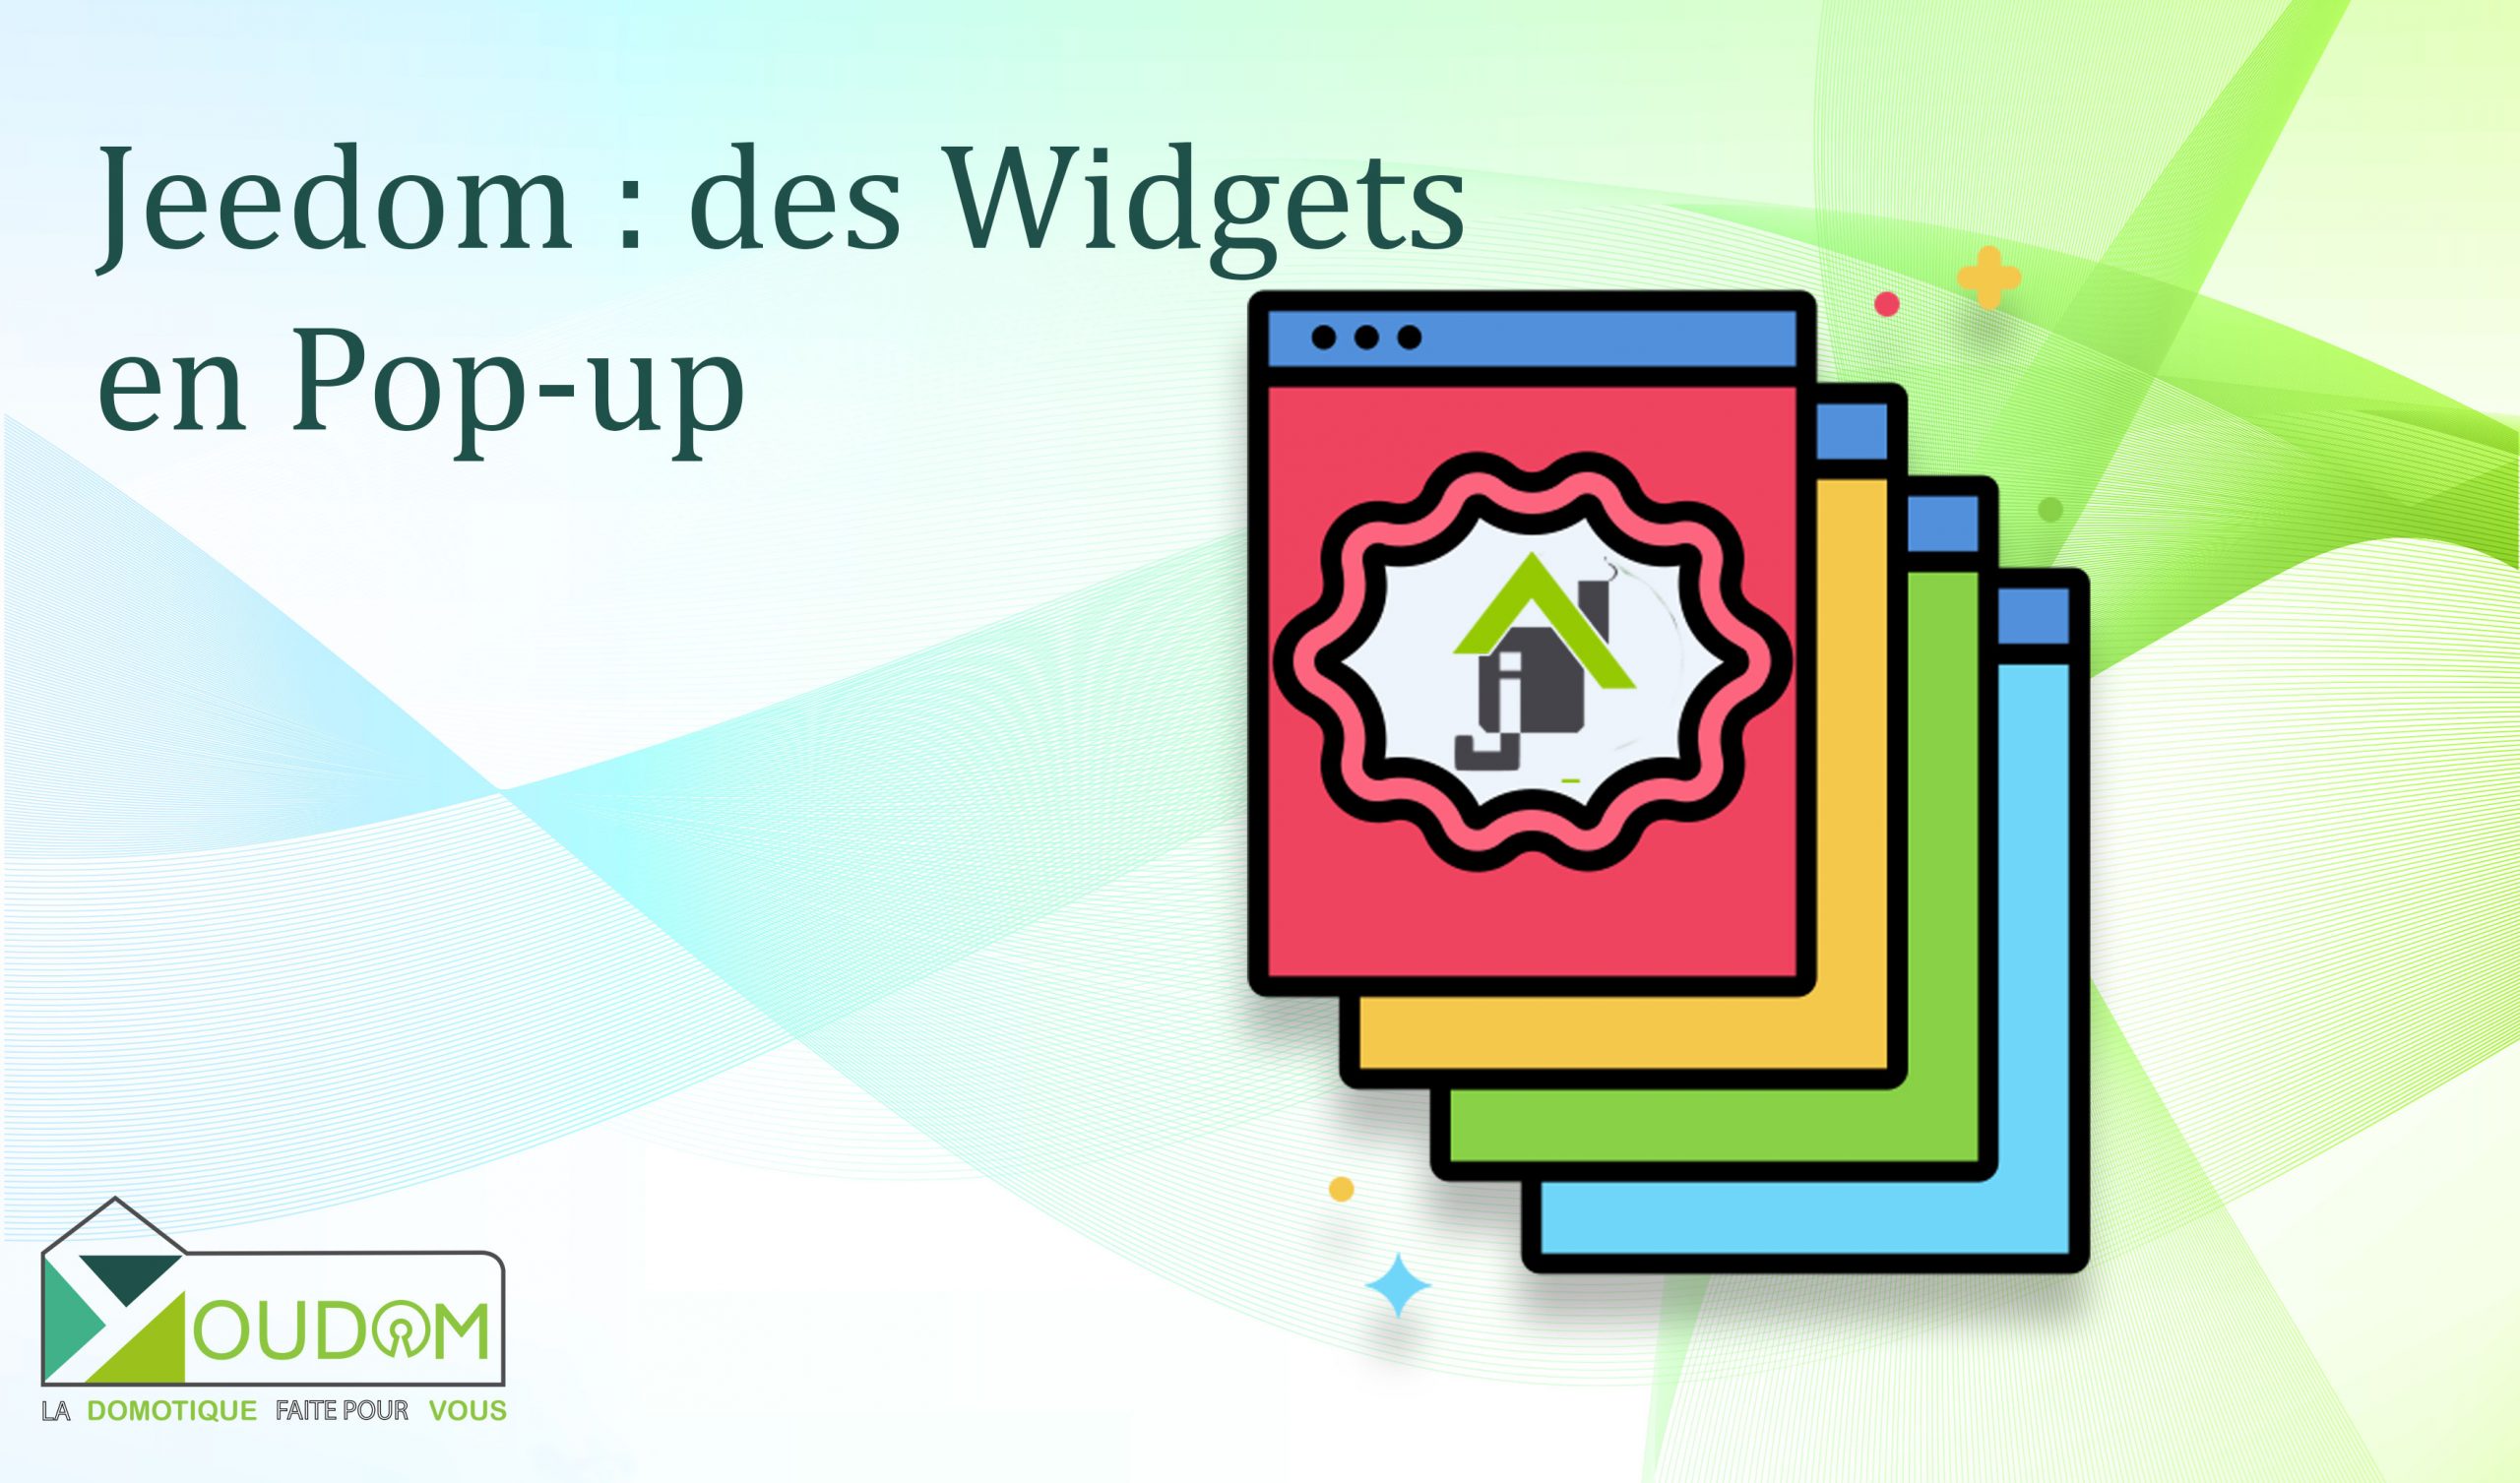 You are currently viewing Jeedom : des Widgets en Pop-up